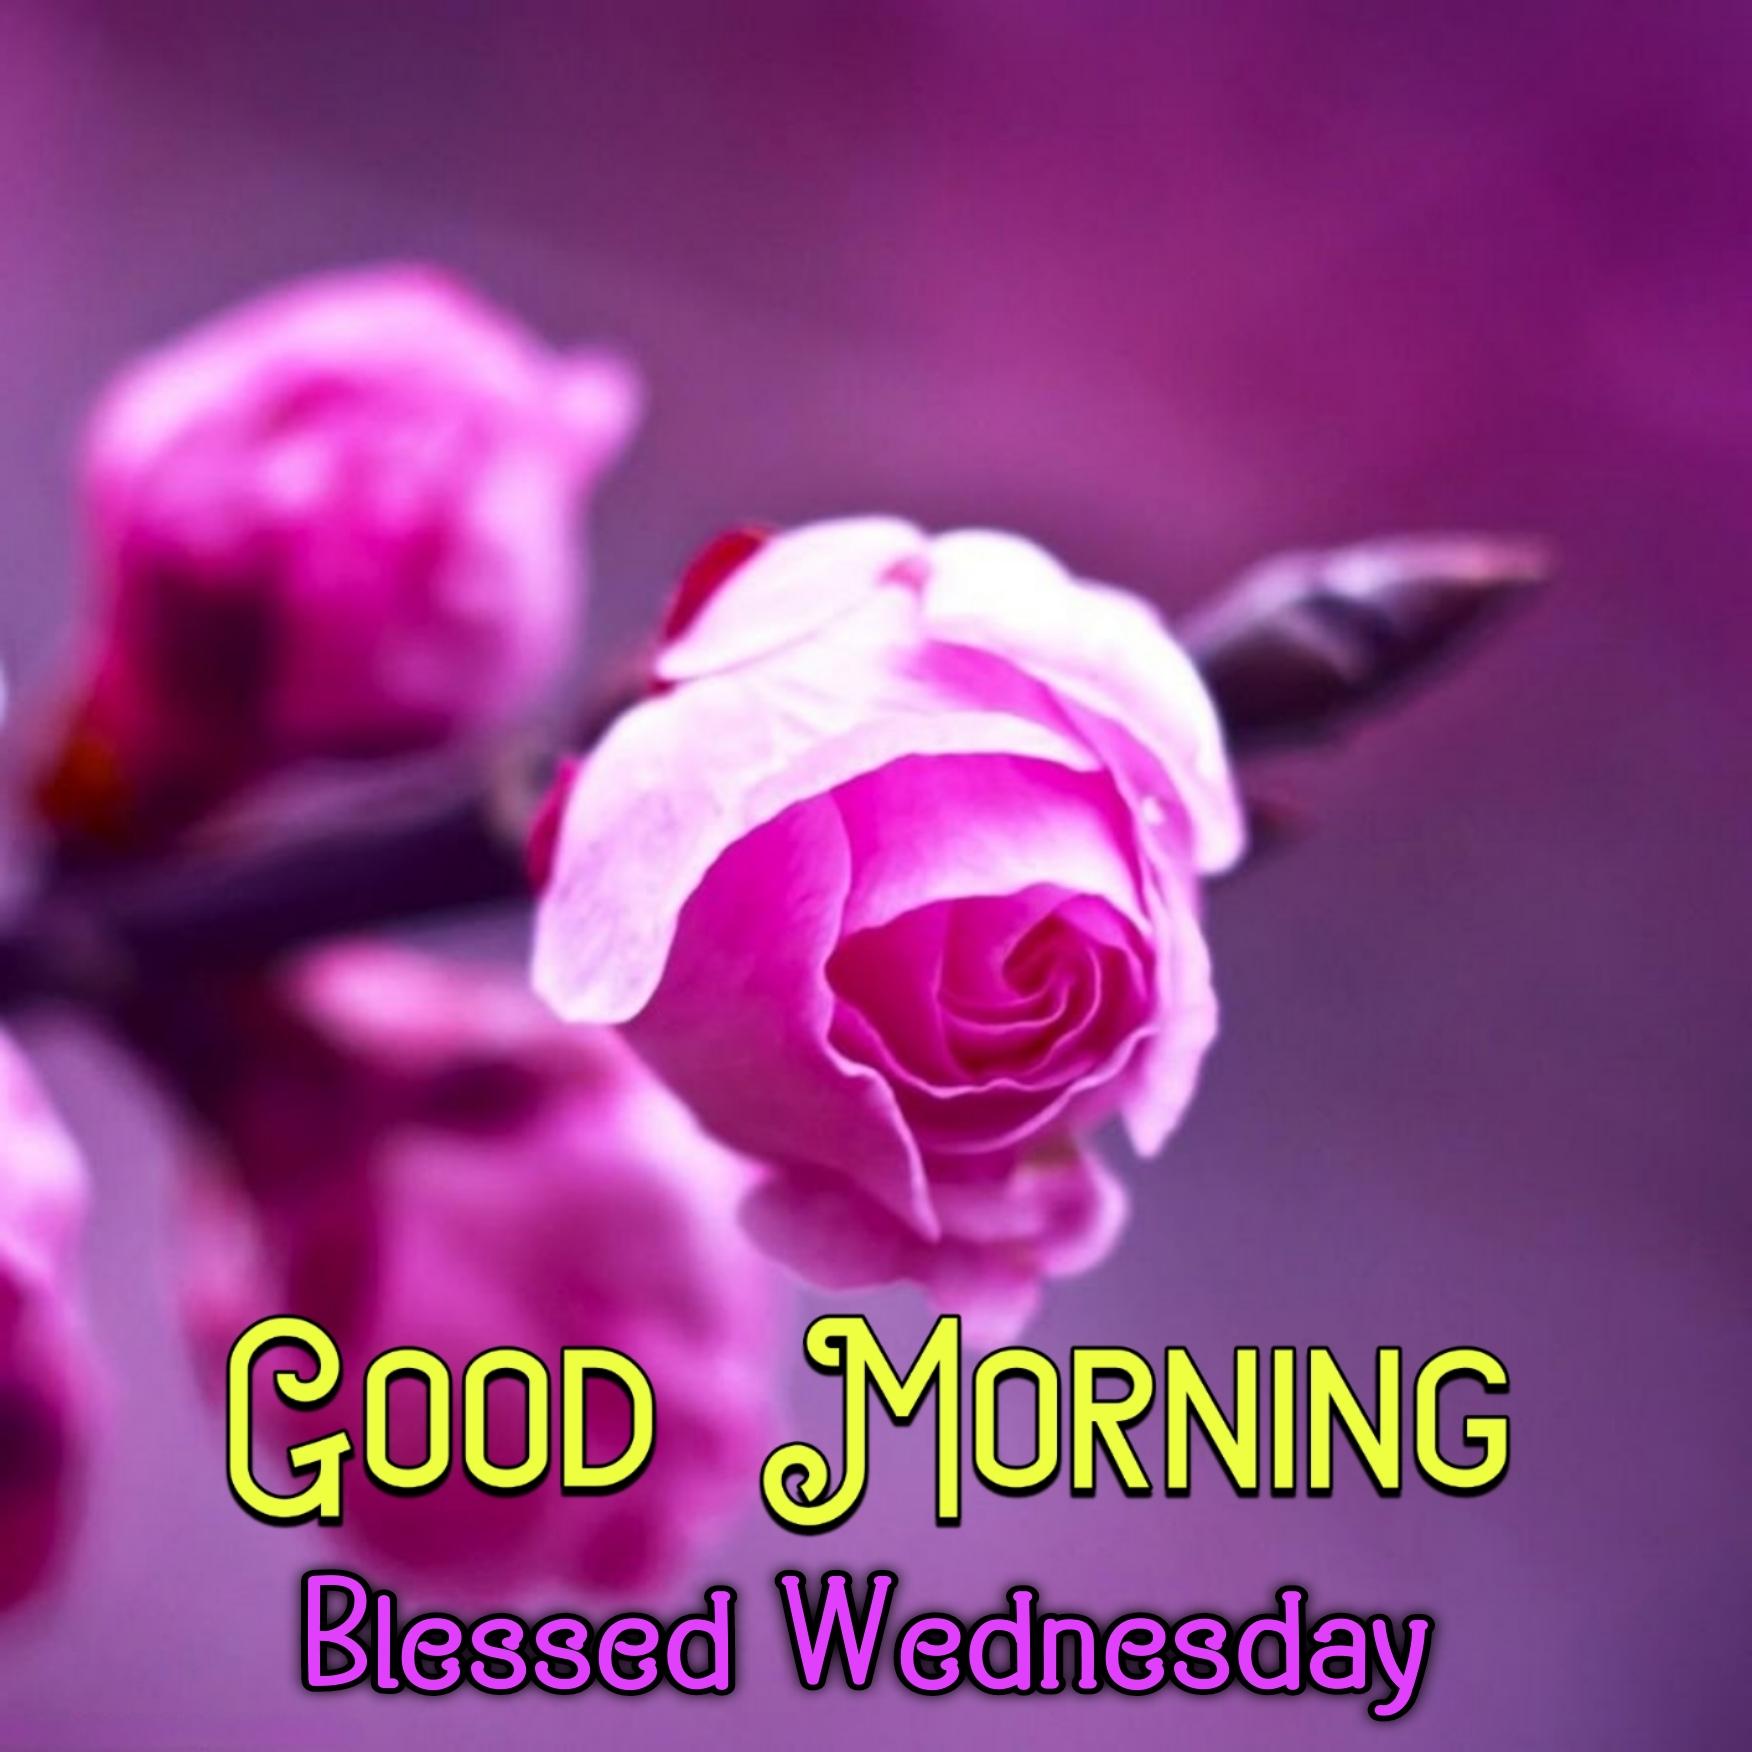 Good Morning Blessed Wednesday Images